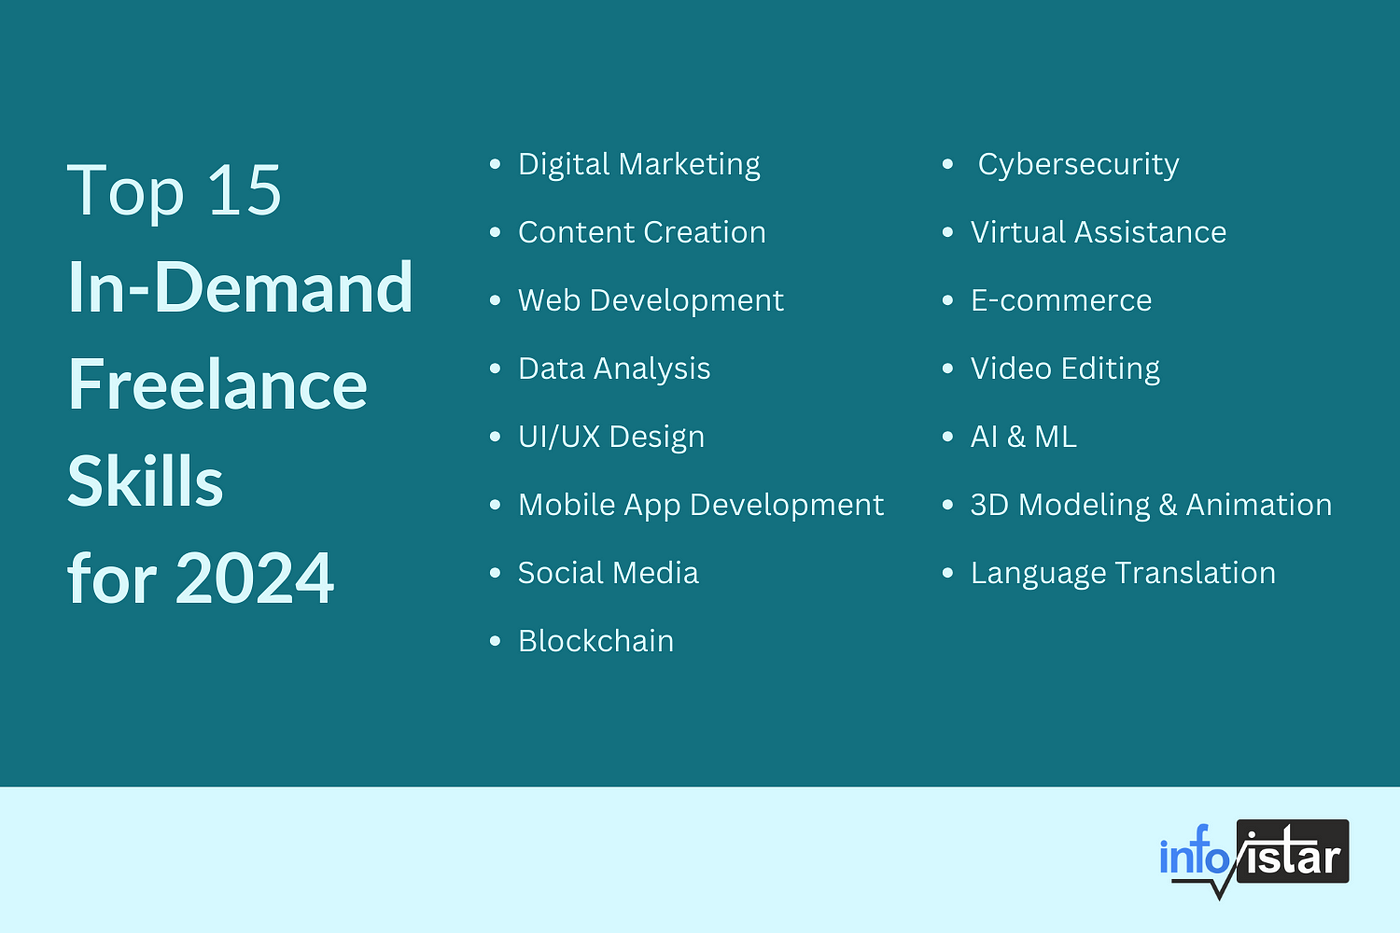 Top 8 Tech Skill to Learn in 2024: According to Upwork, They are the Most In-Demand Skills of the Year.